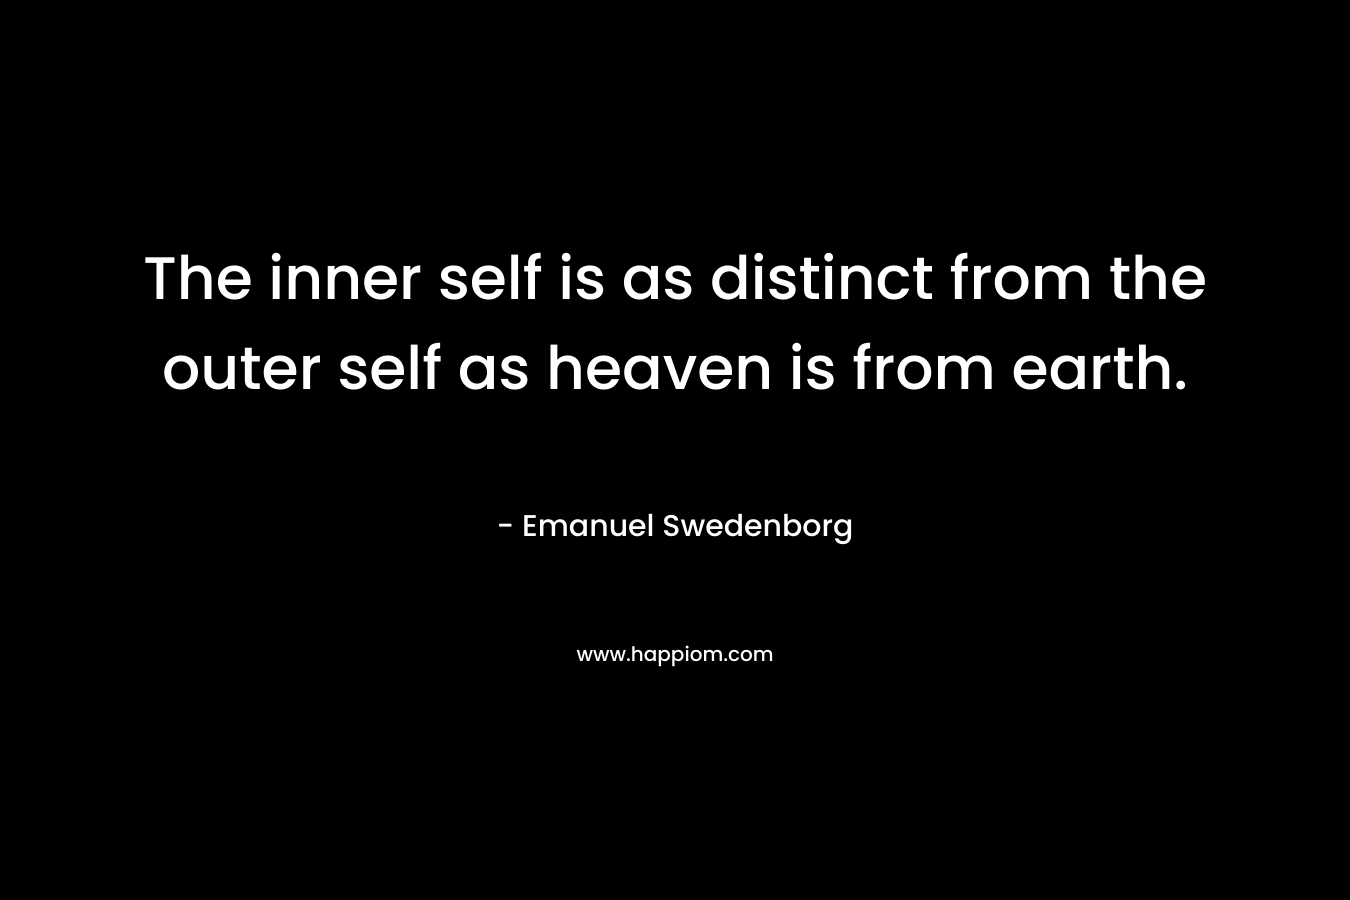 The inner self is as distinct from the outer self as heaven is from earth. – Emanuel Swedenborg